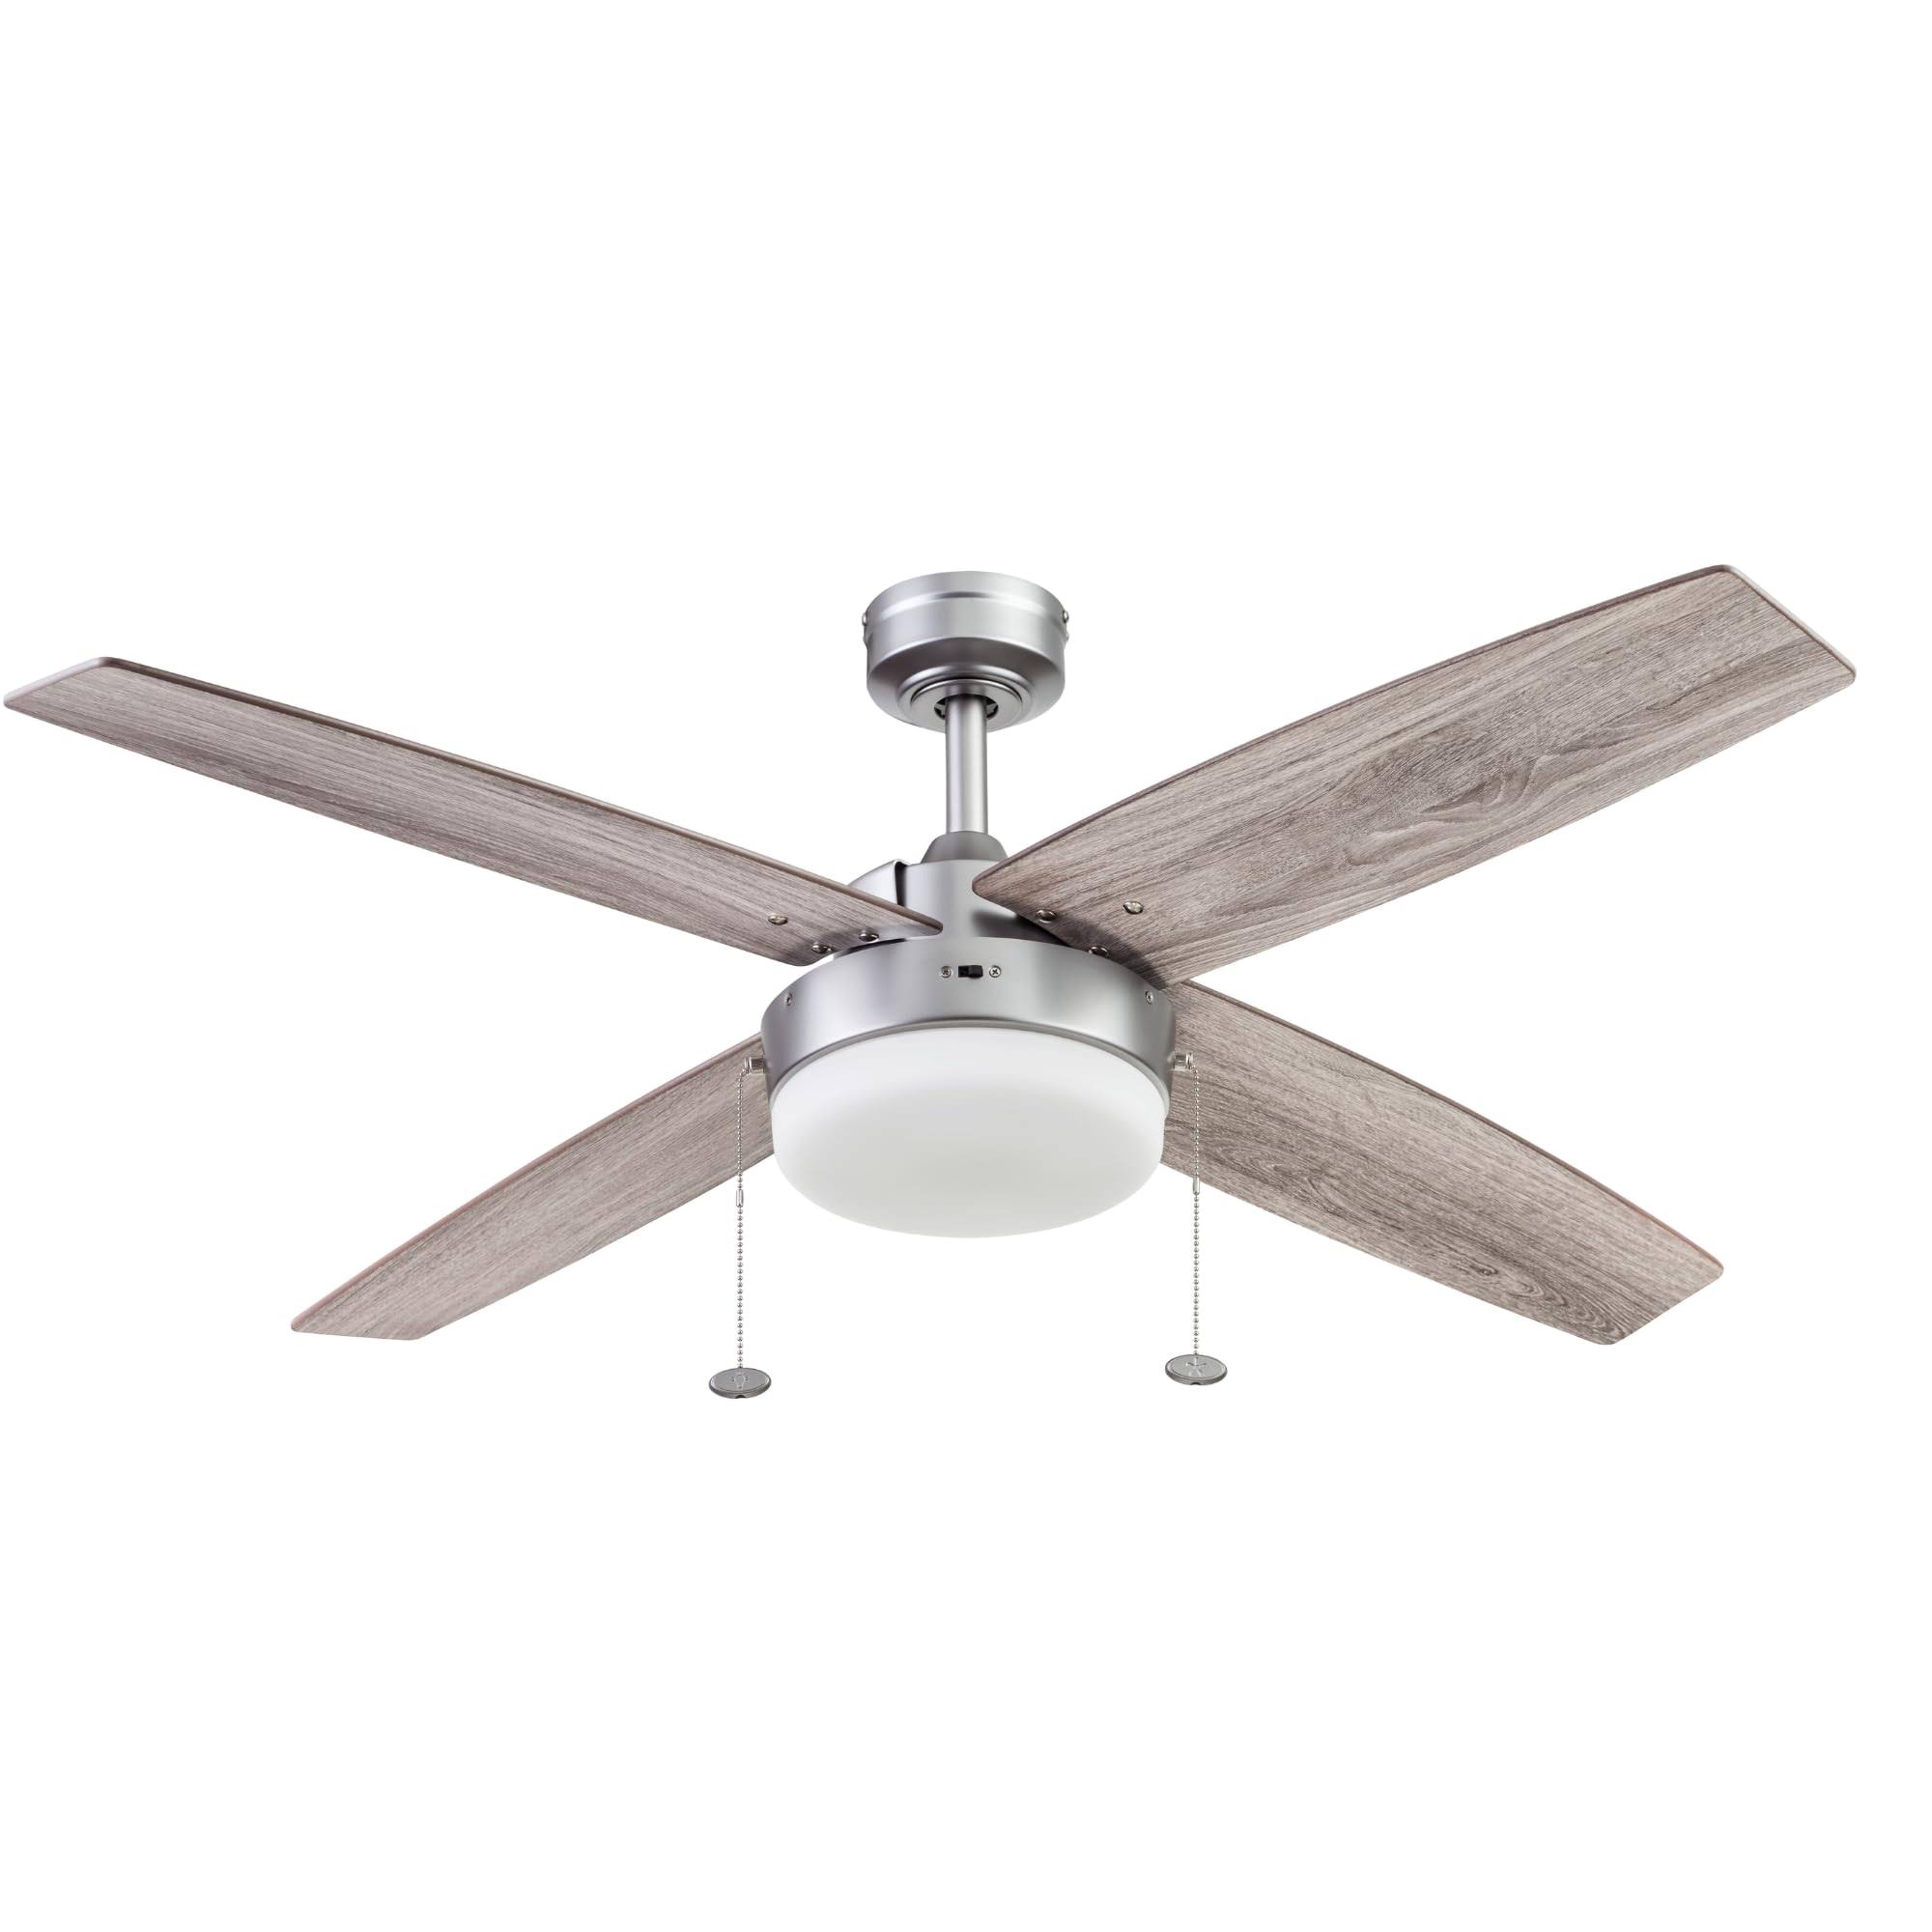 Prominence Home Memphis 52-in Pewter LED Indoor Ceiling Fan with Light